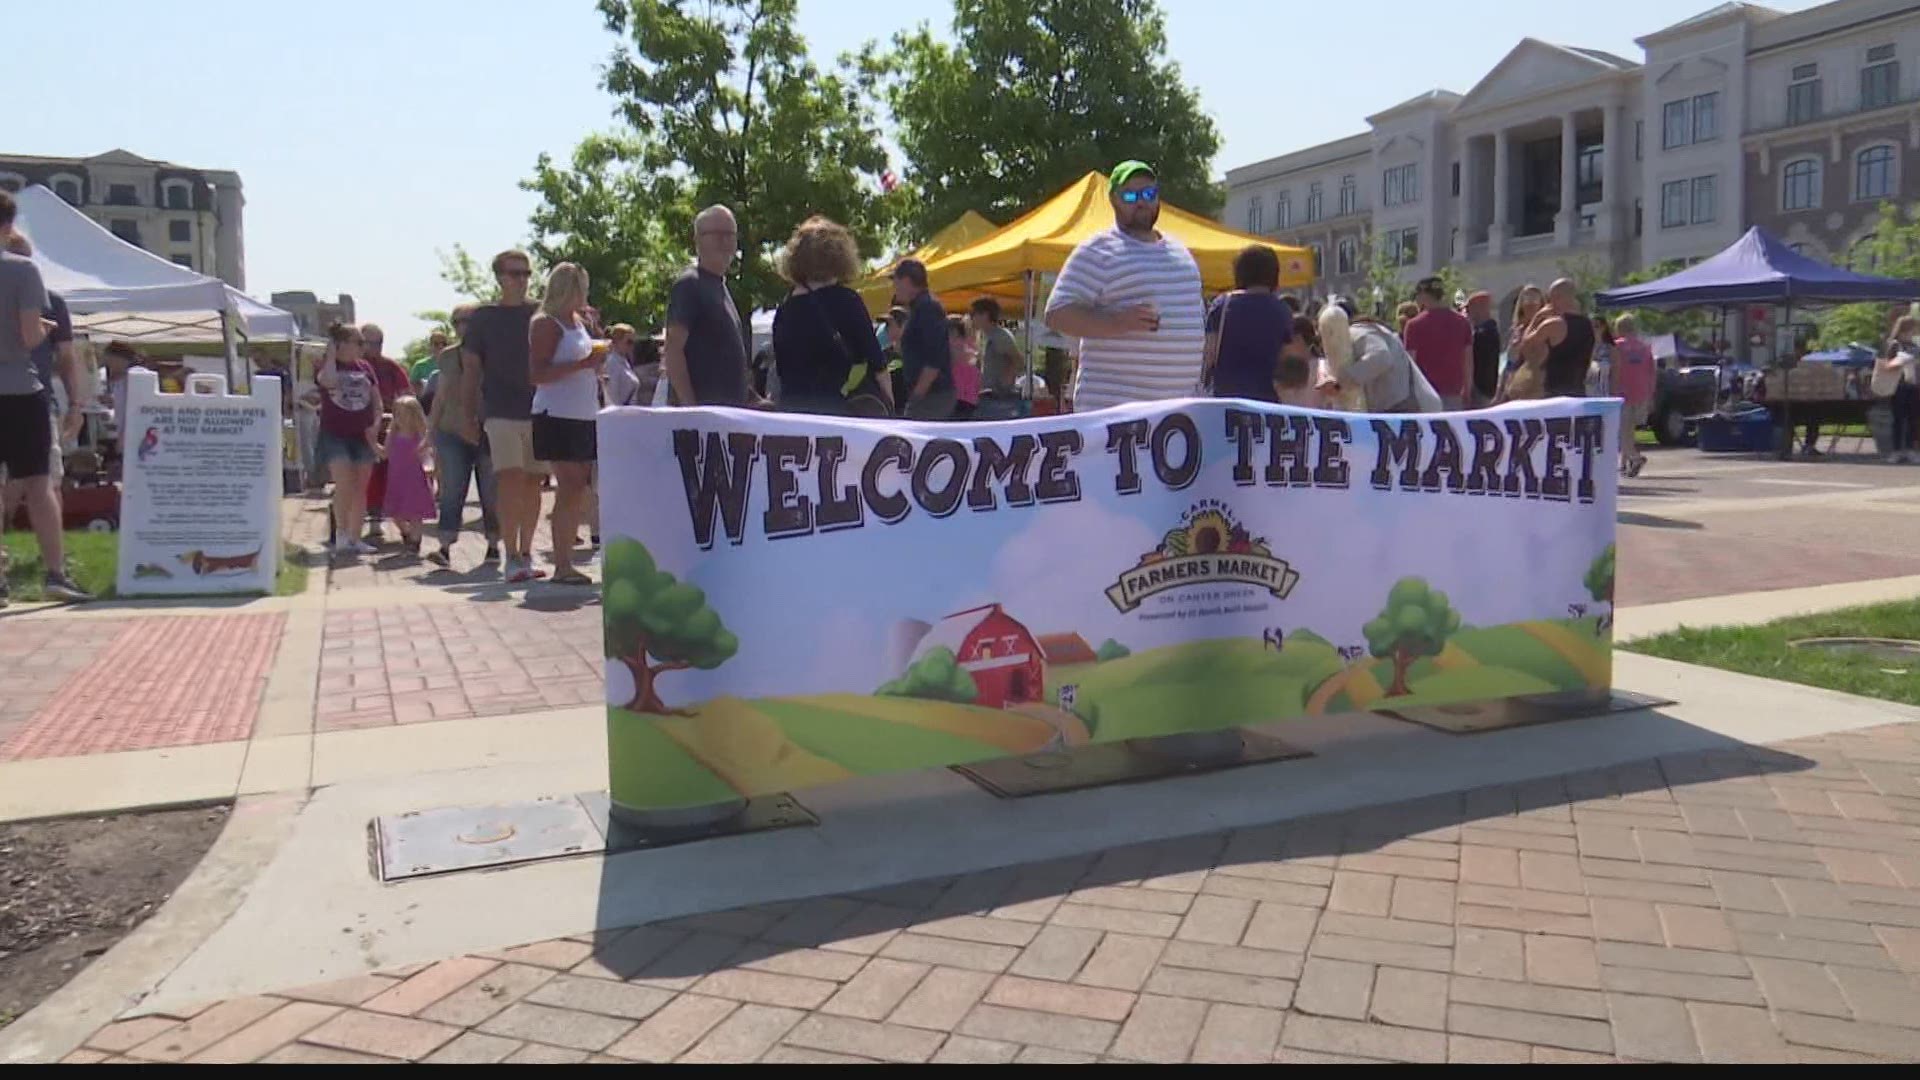 About 7,000 people went to the Carmel Farmers Market on Saturday, July 3, 2021.